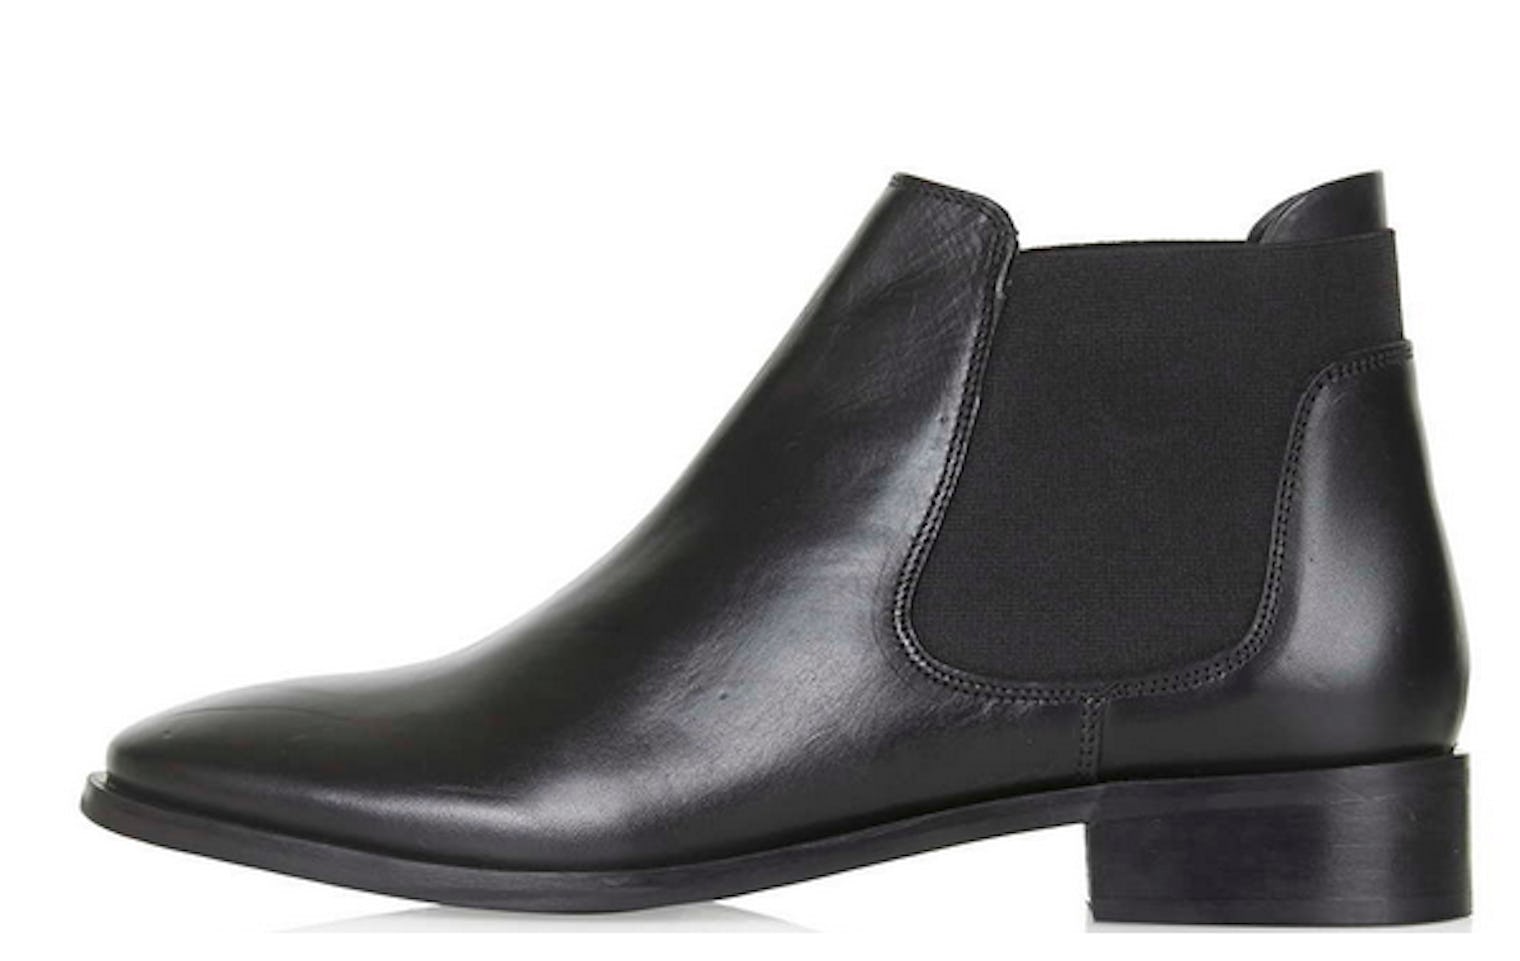 7 Styles Of Boots To Wear With Skinny Jeans This Fall